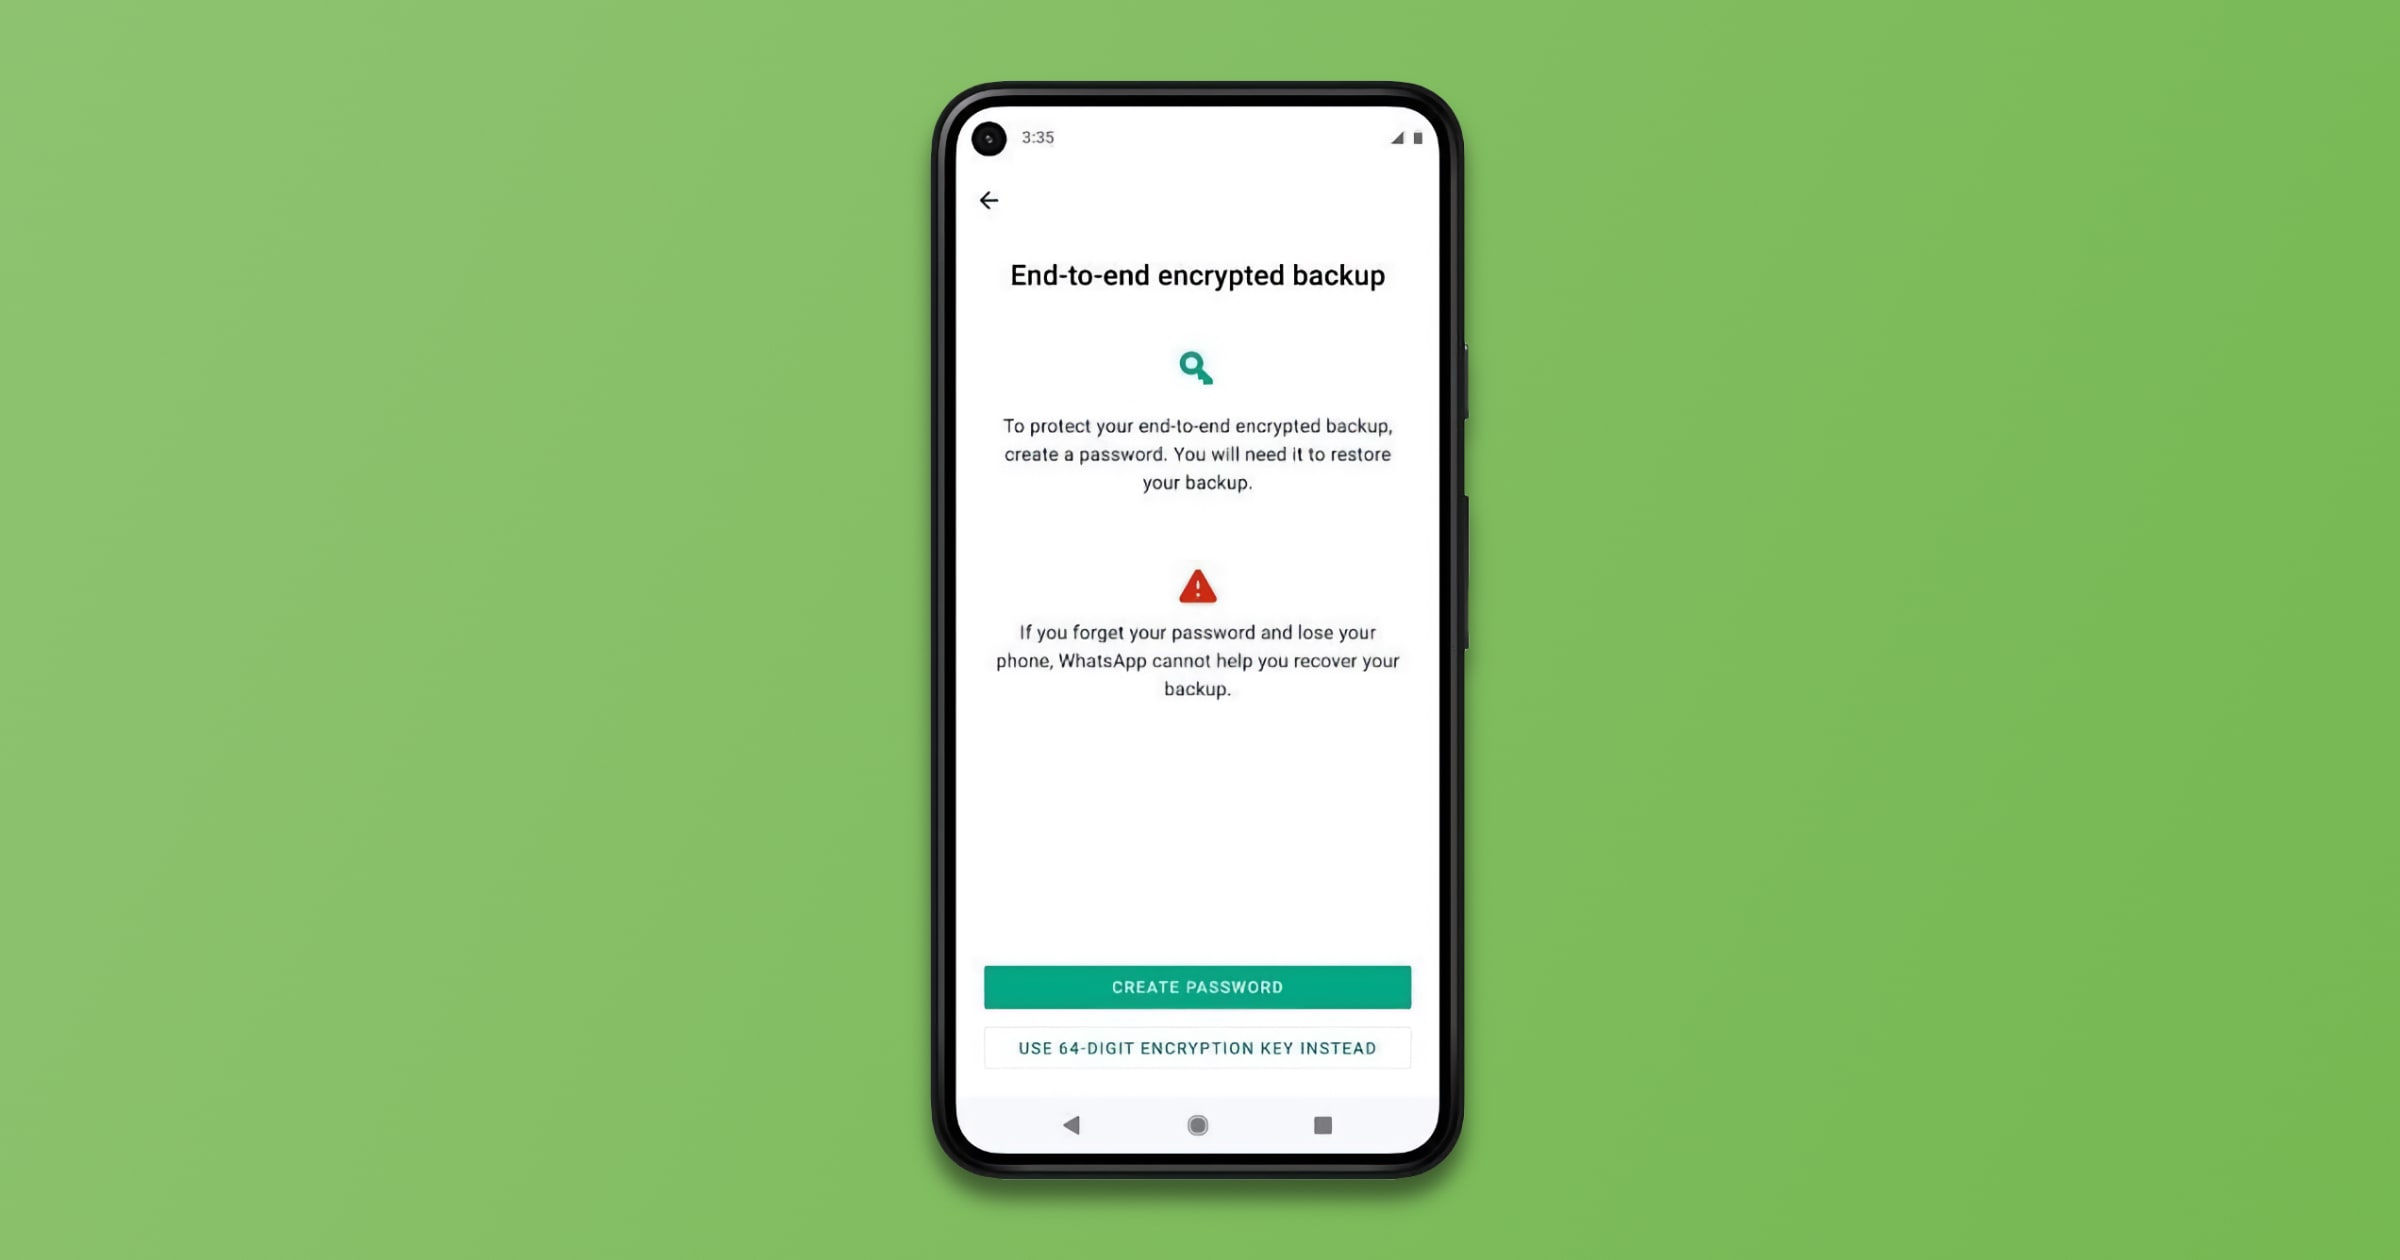 whatsapp backups end-to-end encrypted